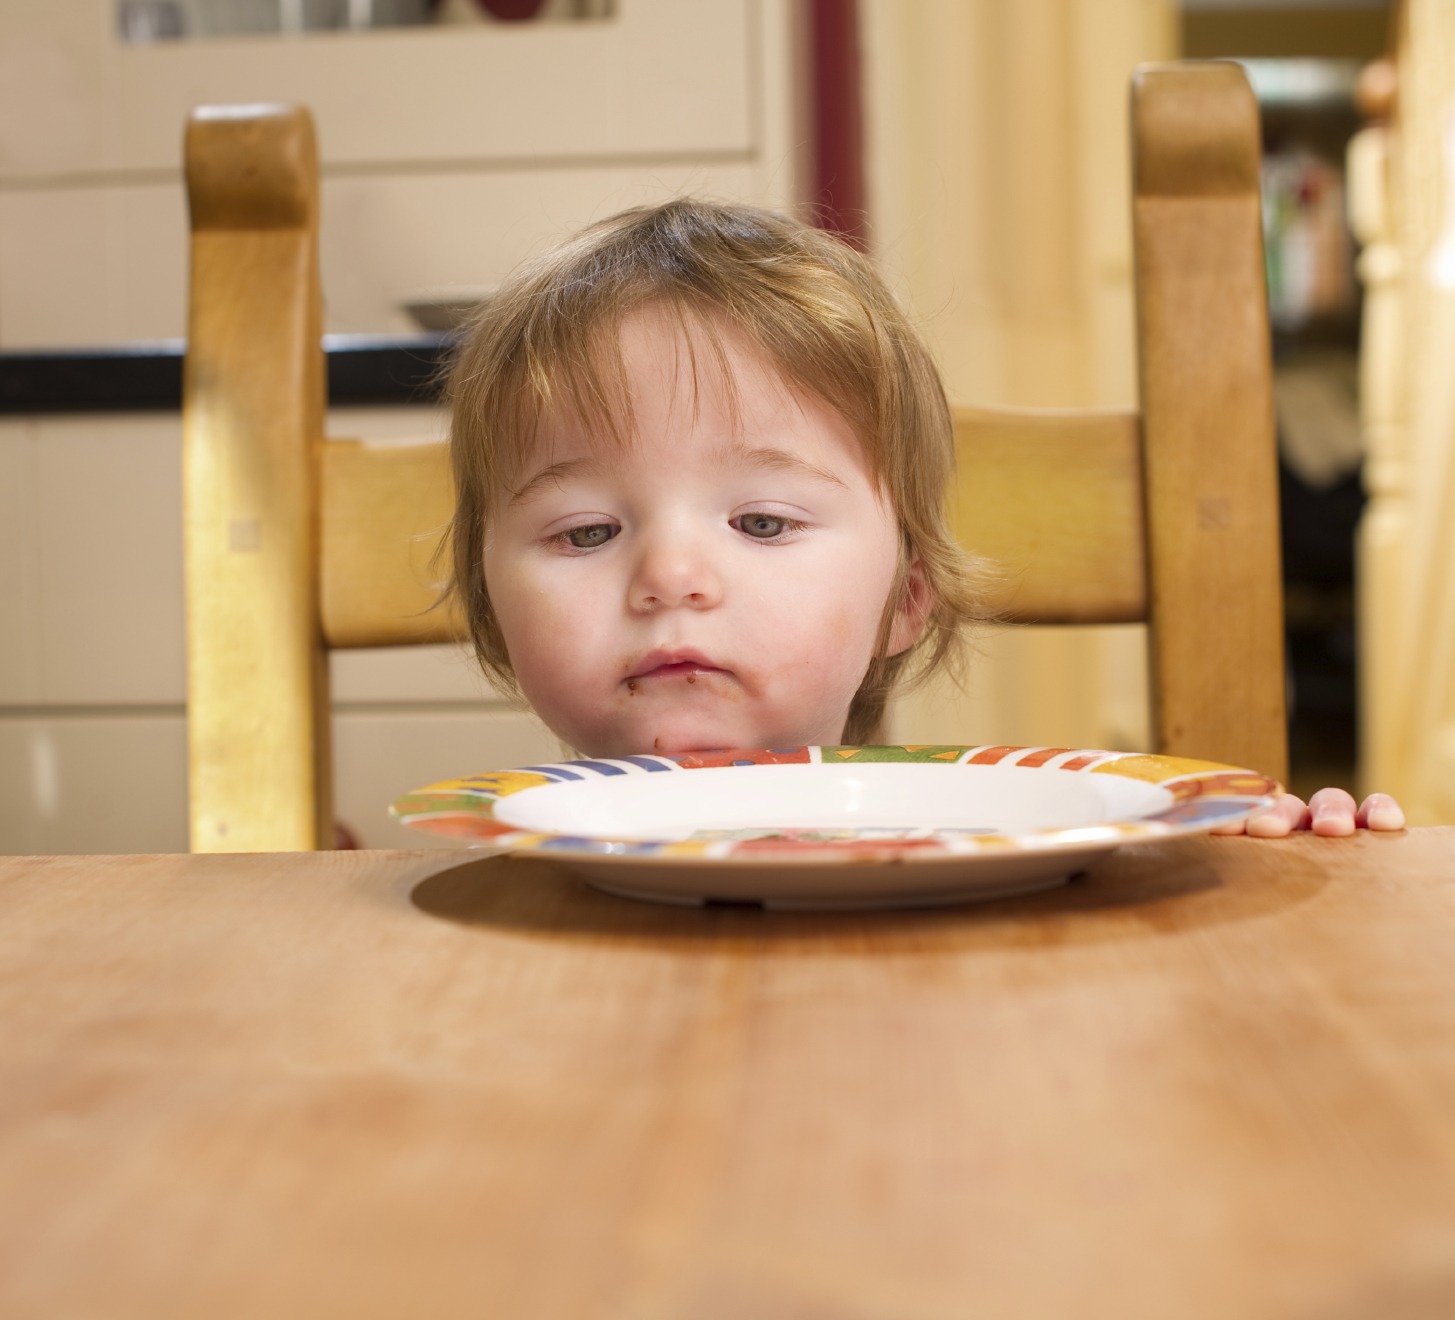 Young toddler sits in wood chair at wood table, looking at an empty plate